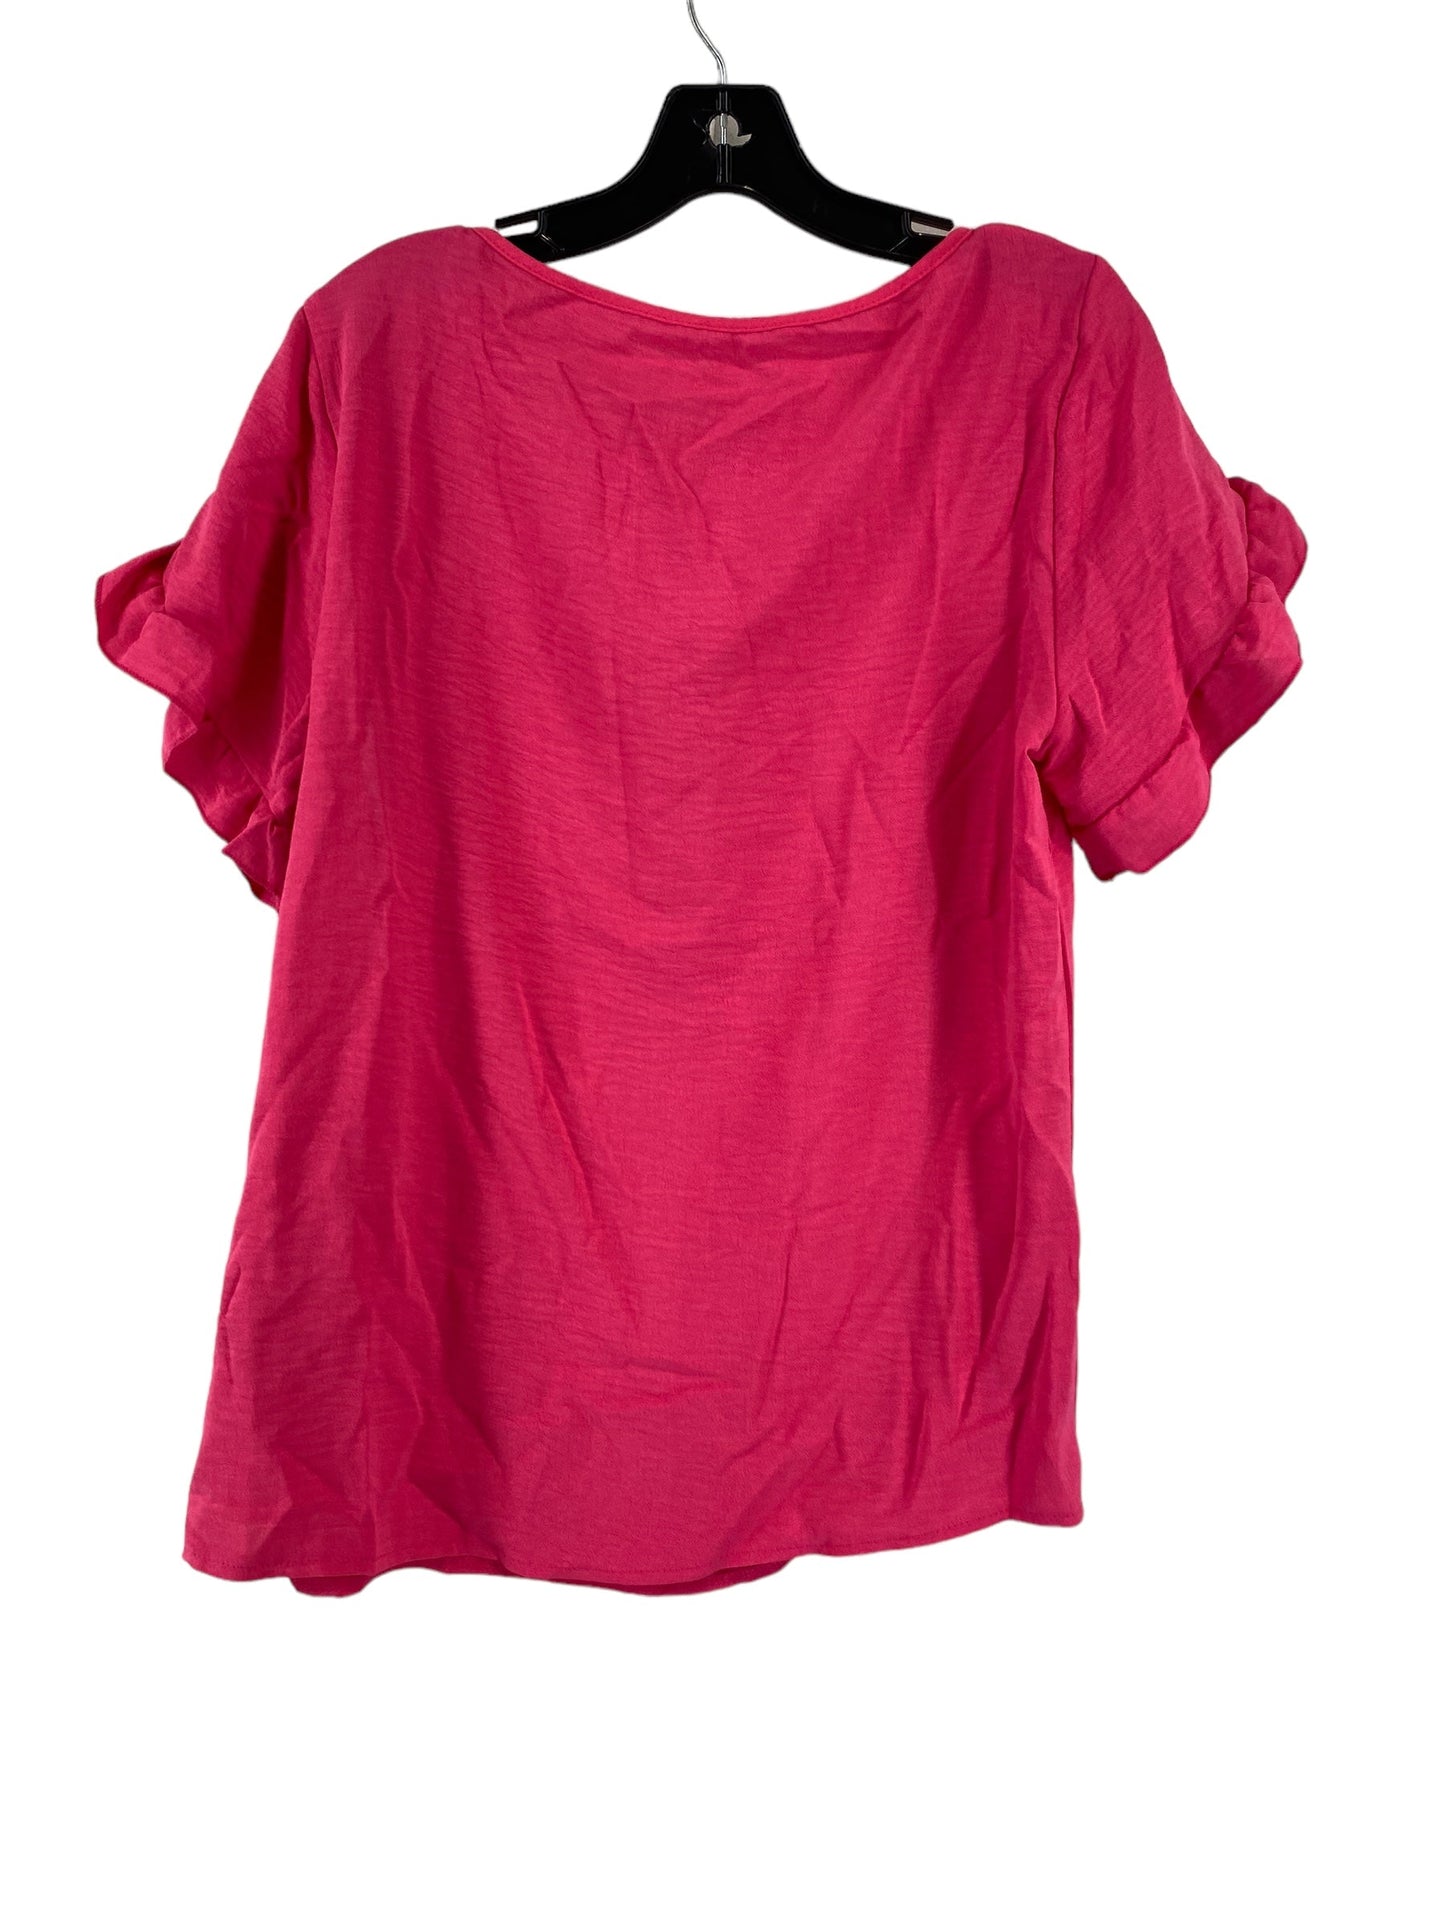 Pink Top Short Sleeve Shein, Size L